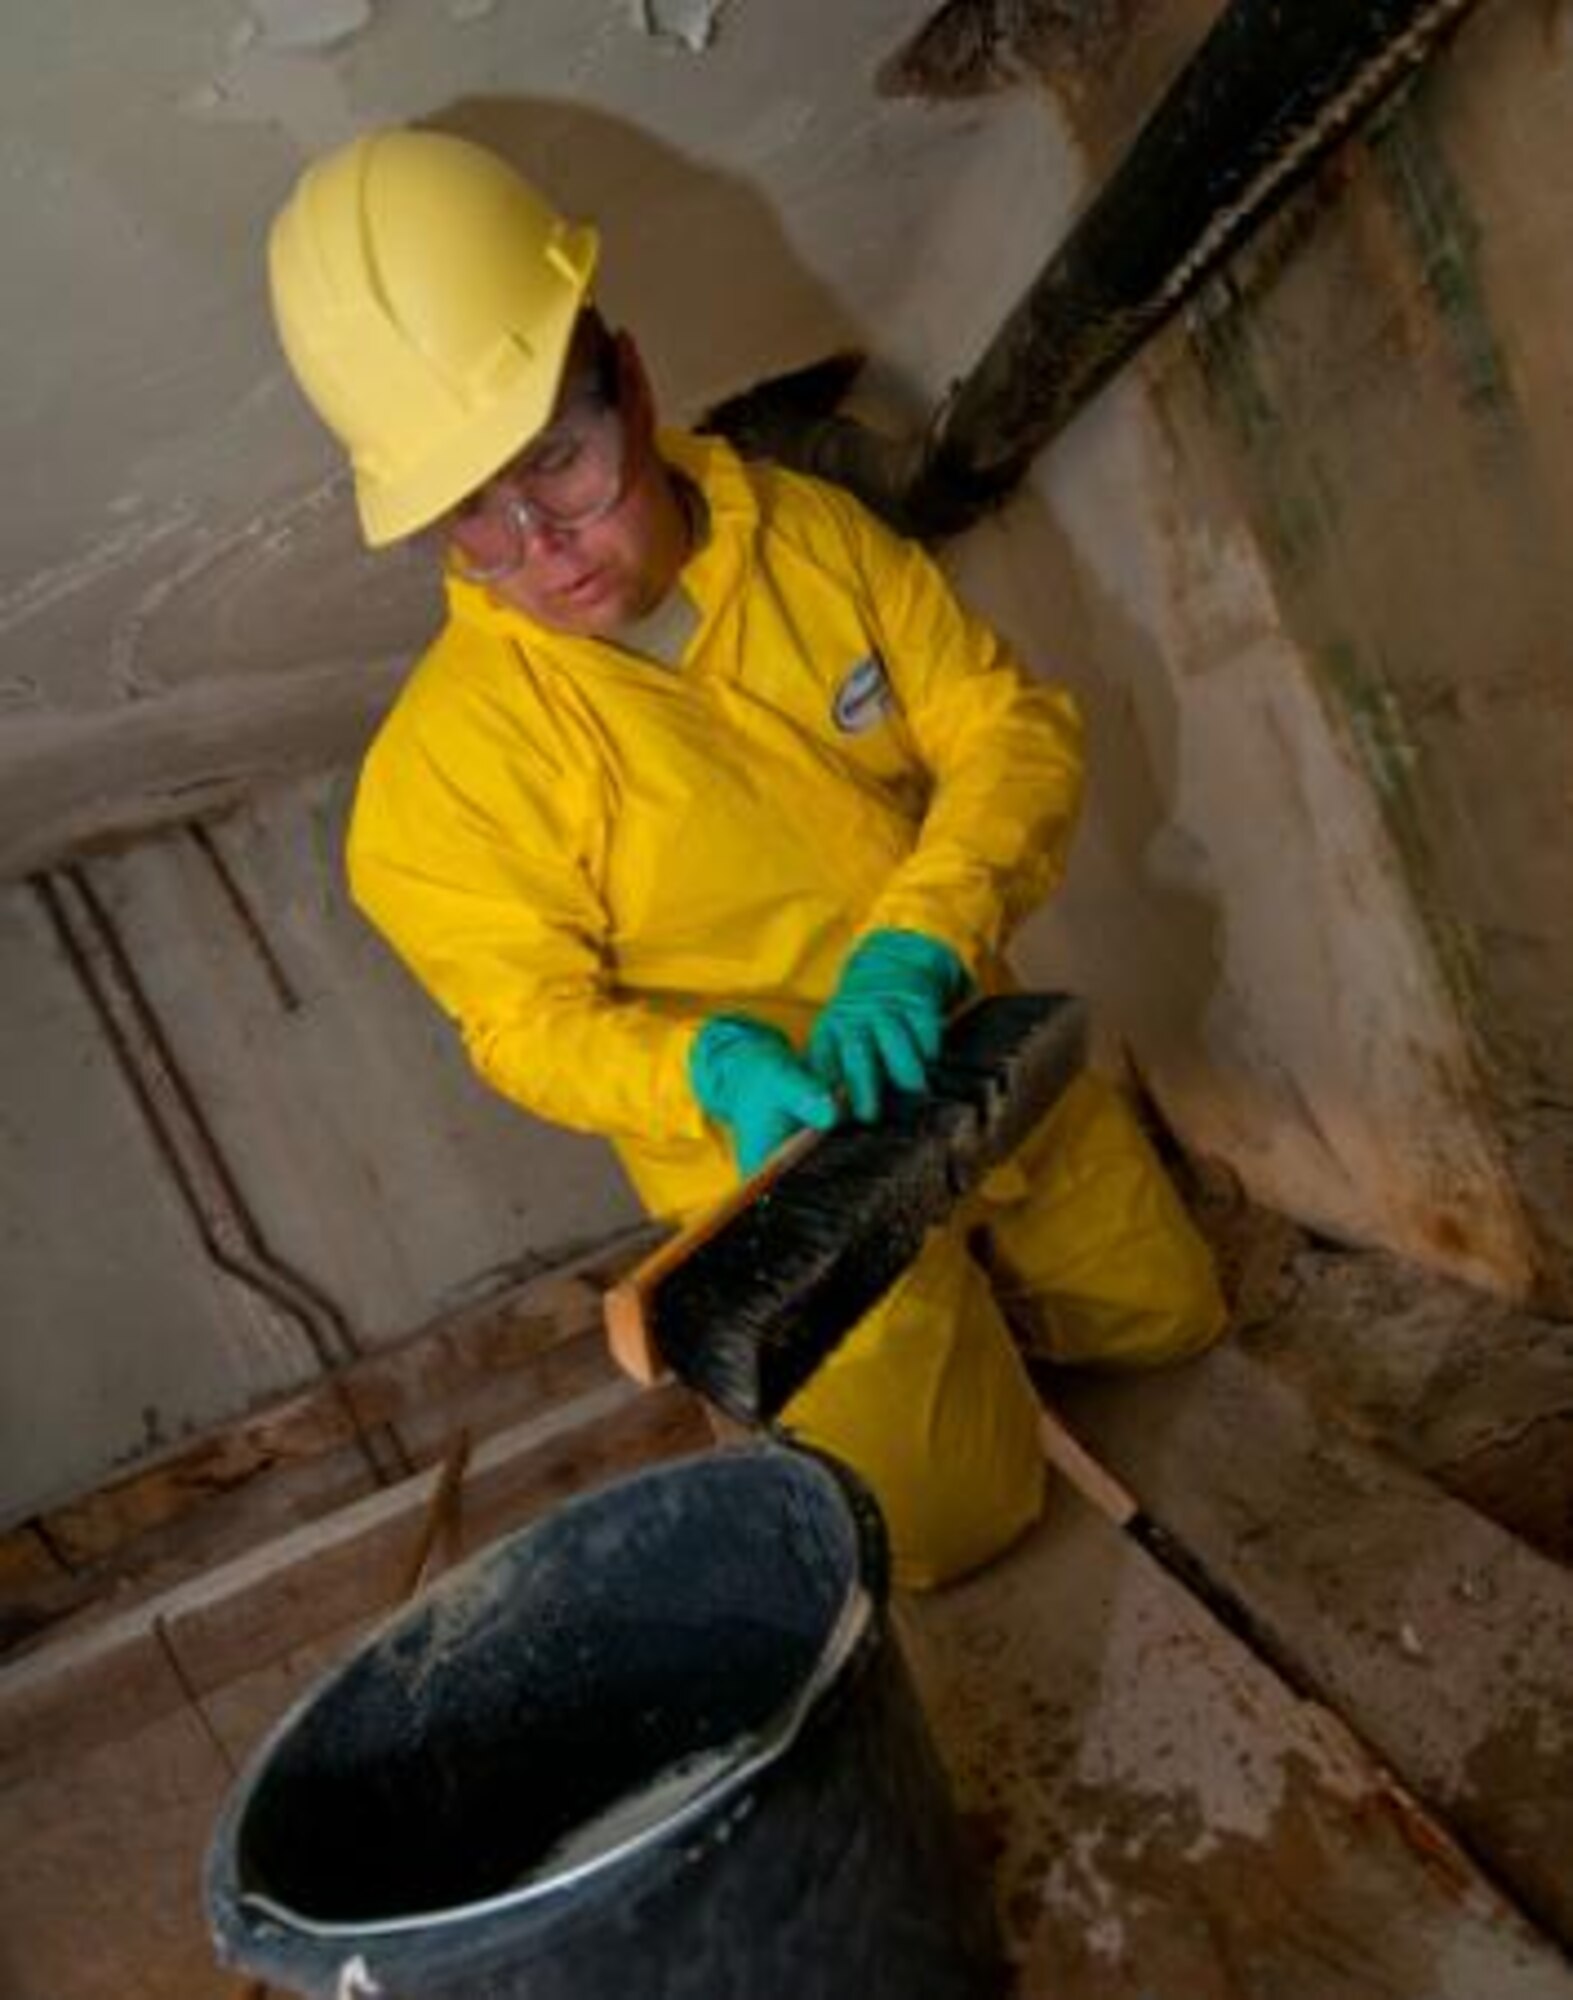 Chief Master Sgt. Kyle Johnson, 148th Civil Engineering Squadron, disinfects a bathroom wall at an elementary school in Ogulin, Croatia, June 19, 2014. The school bathrooms are being renovated by Airmen from the 133rd and 148th Civil Engineering Squadron, and 219th Red Horse Squadron in partnership with the Croatian Army, under the National Guard State Partnership Program. (U.S. Air National Guard photo by Staff Sgt. Austen Adriaens)